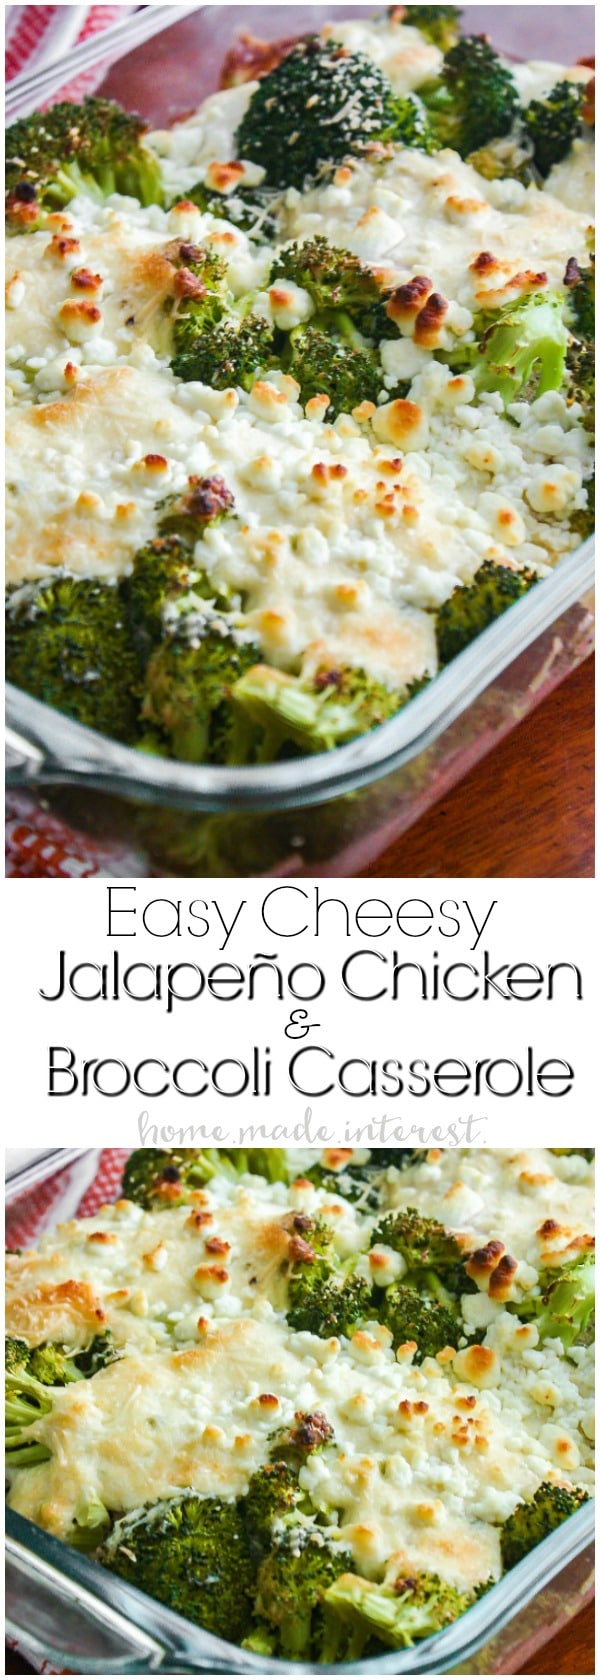 Easy Cheesy Jalapeno Chicken and Broccoli Casserole | This cheesy jalapeno chicken and broccoli casserole is an easy low carb dinner recipe that is packed full of flavor. If you are looking for a low carb recipe idea you’ll love this low carb casserole. It is a great easy weeknight dinner recipe that the whole family will love. 